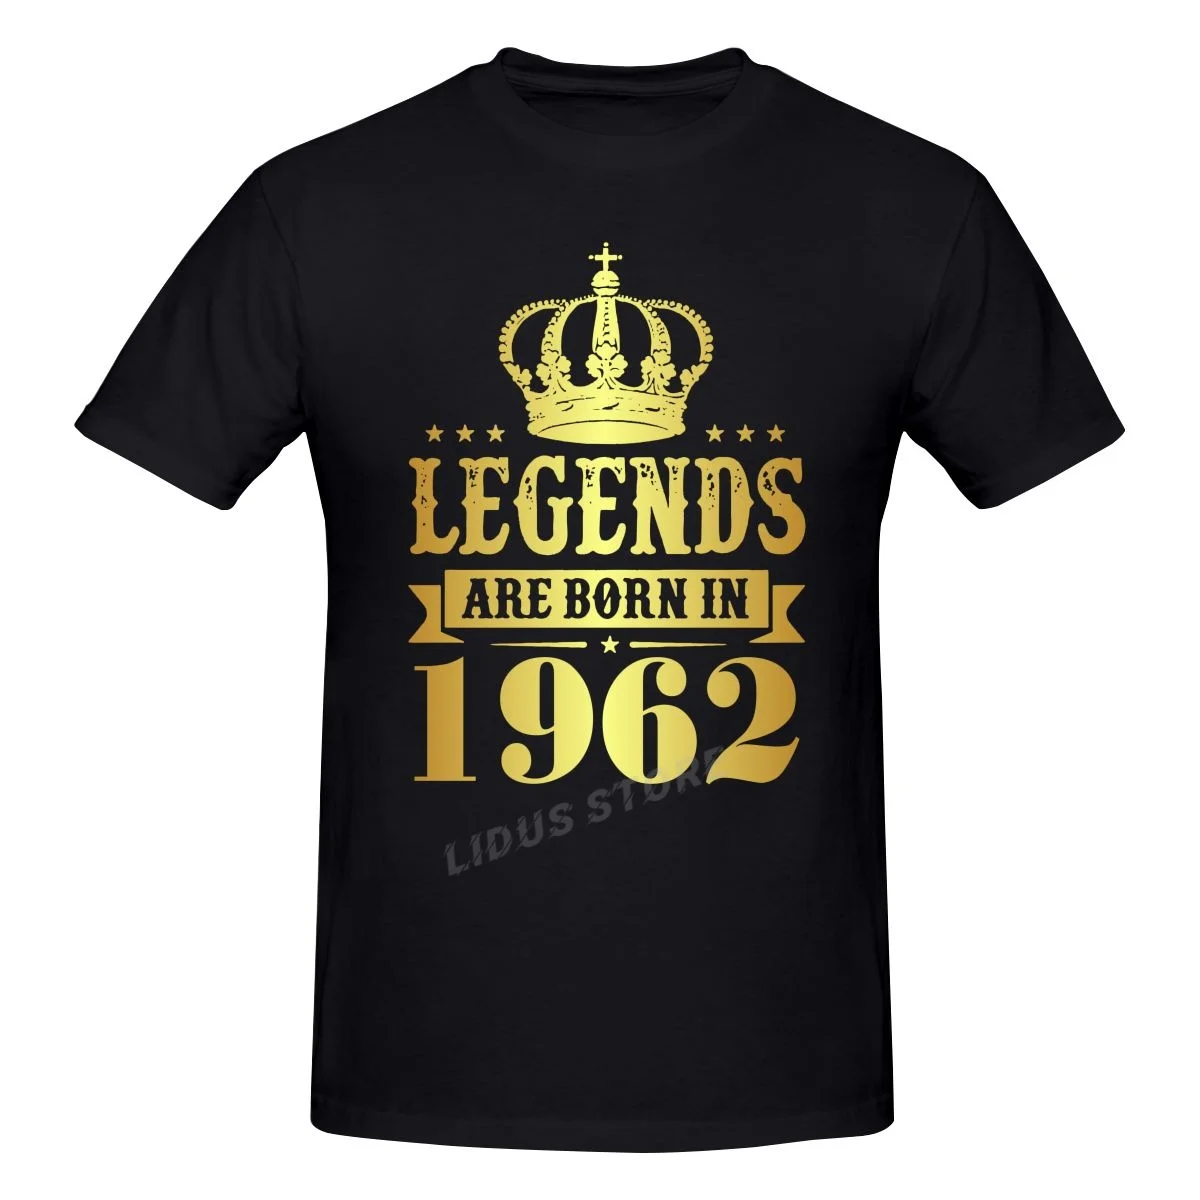 Legends Are Born In 1962 60 Years For 60th Birthday Gift T shirt Harajuku Clothing T-shirt 100% Cotton Graphics Tshirt Tee Tops